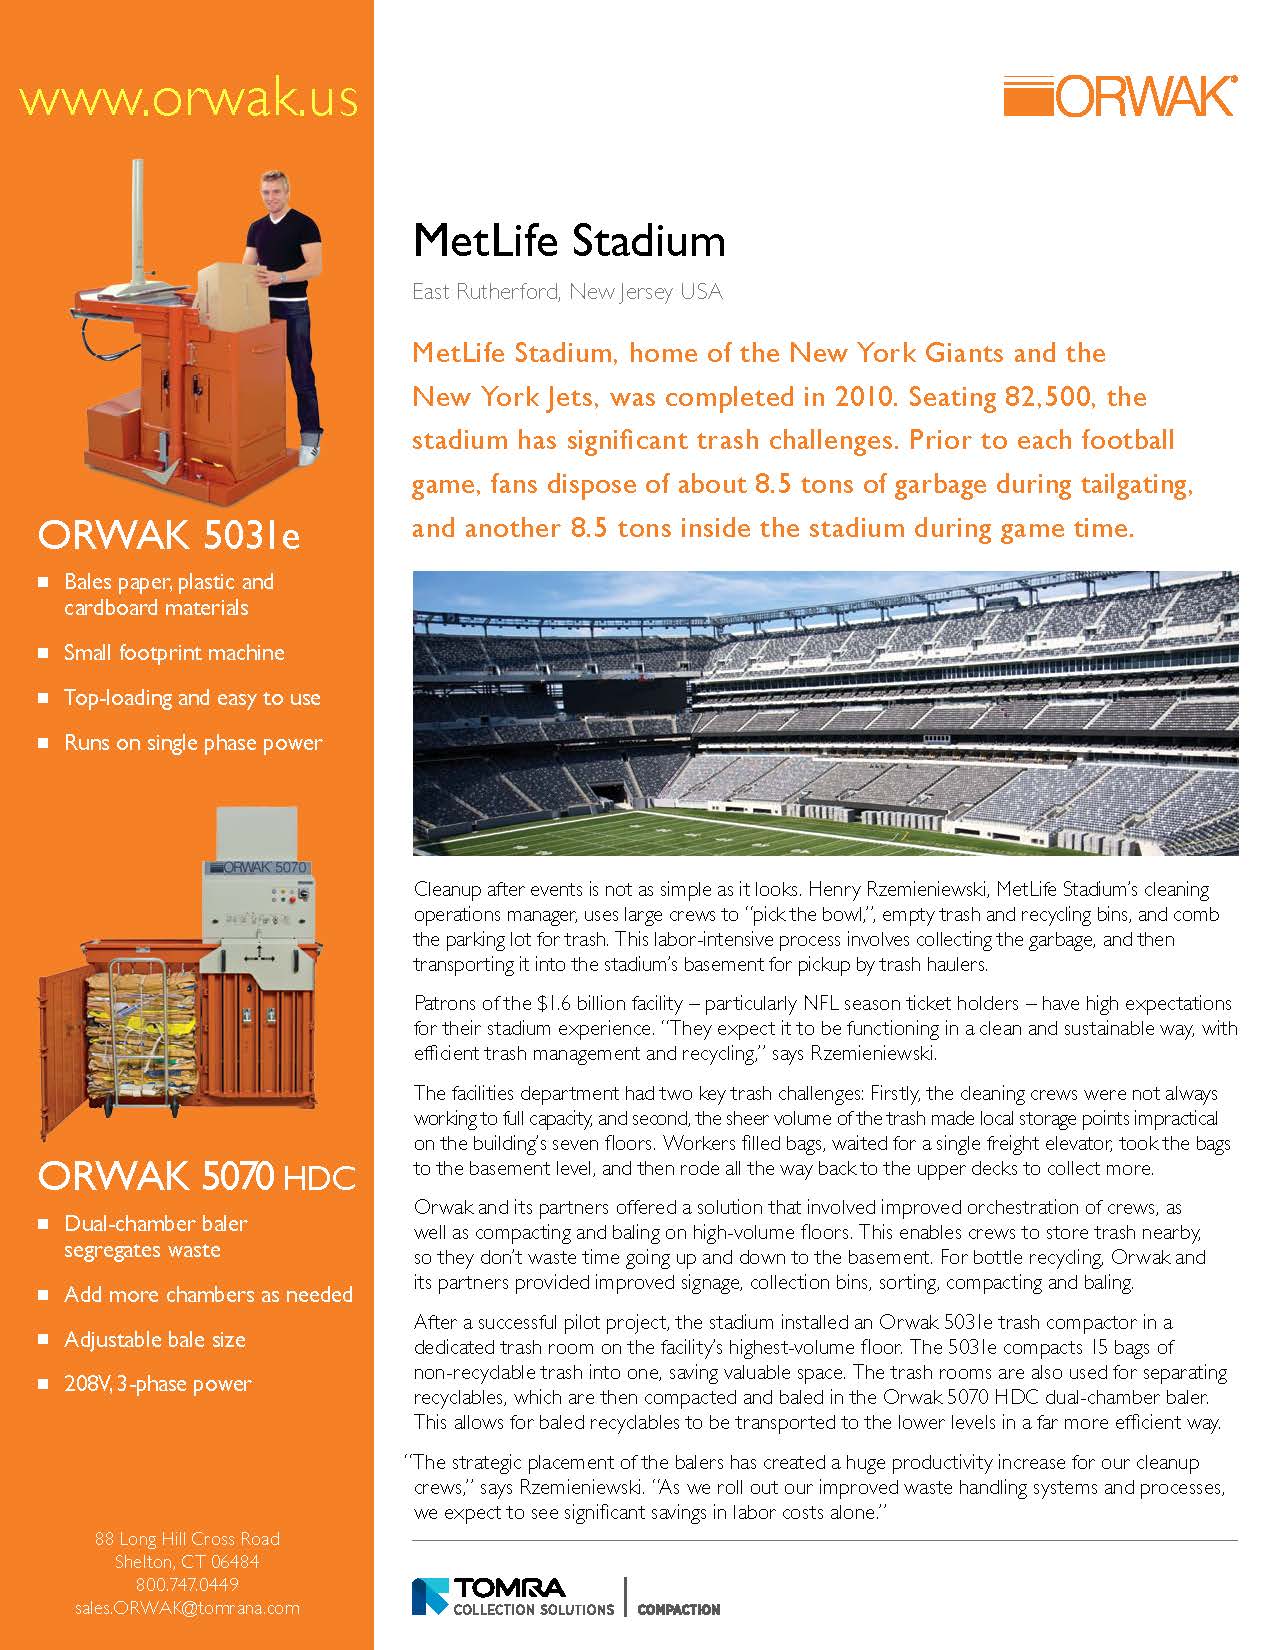 Tomra case study gaining  access to the Jets and Giants Stadium